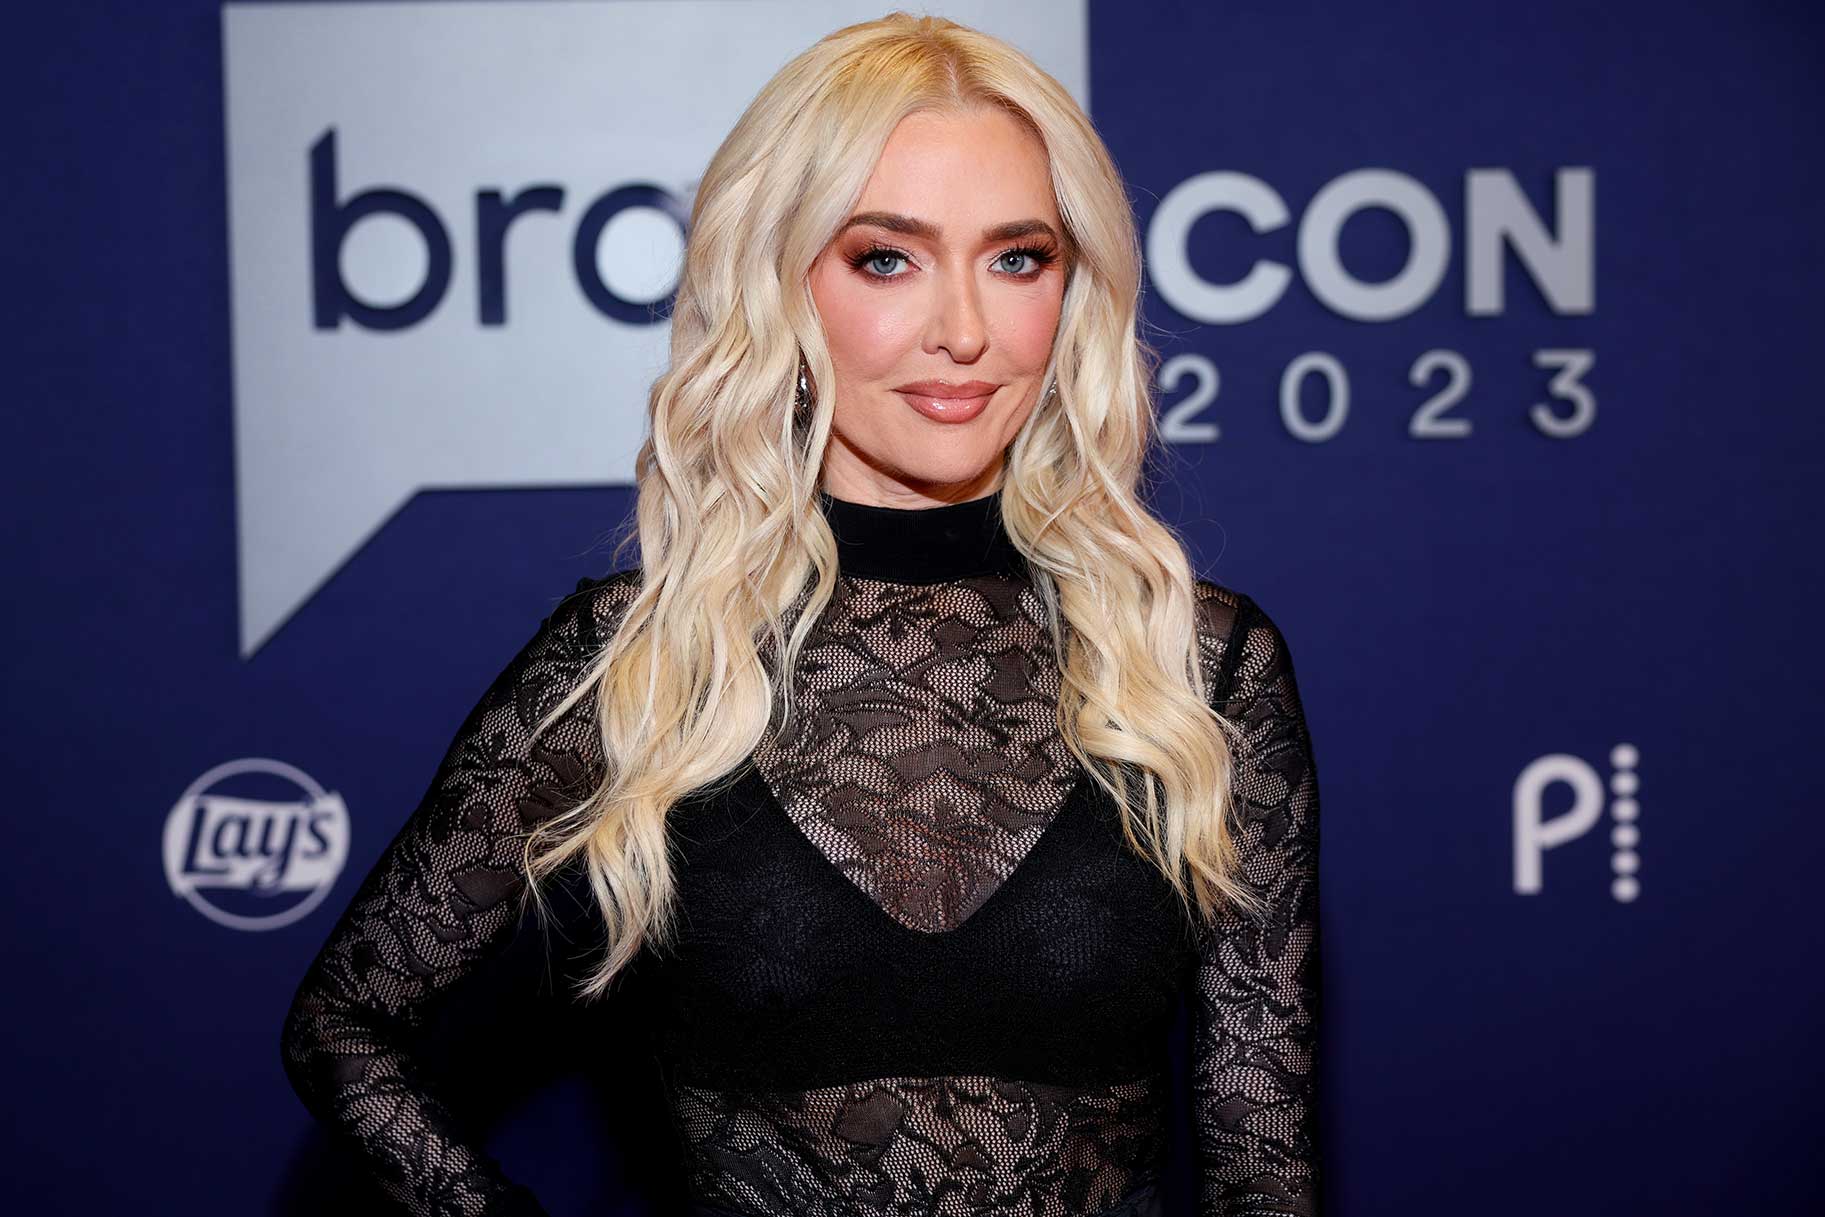 A close up of Erika Jayne wearing an all black lace top and posing for the camera.